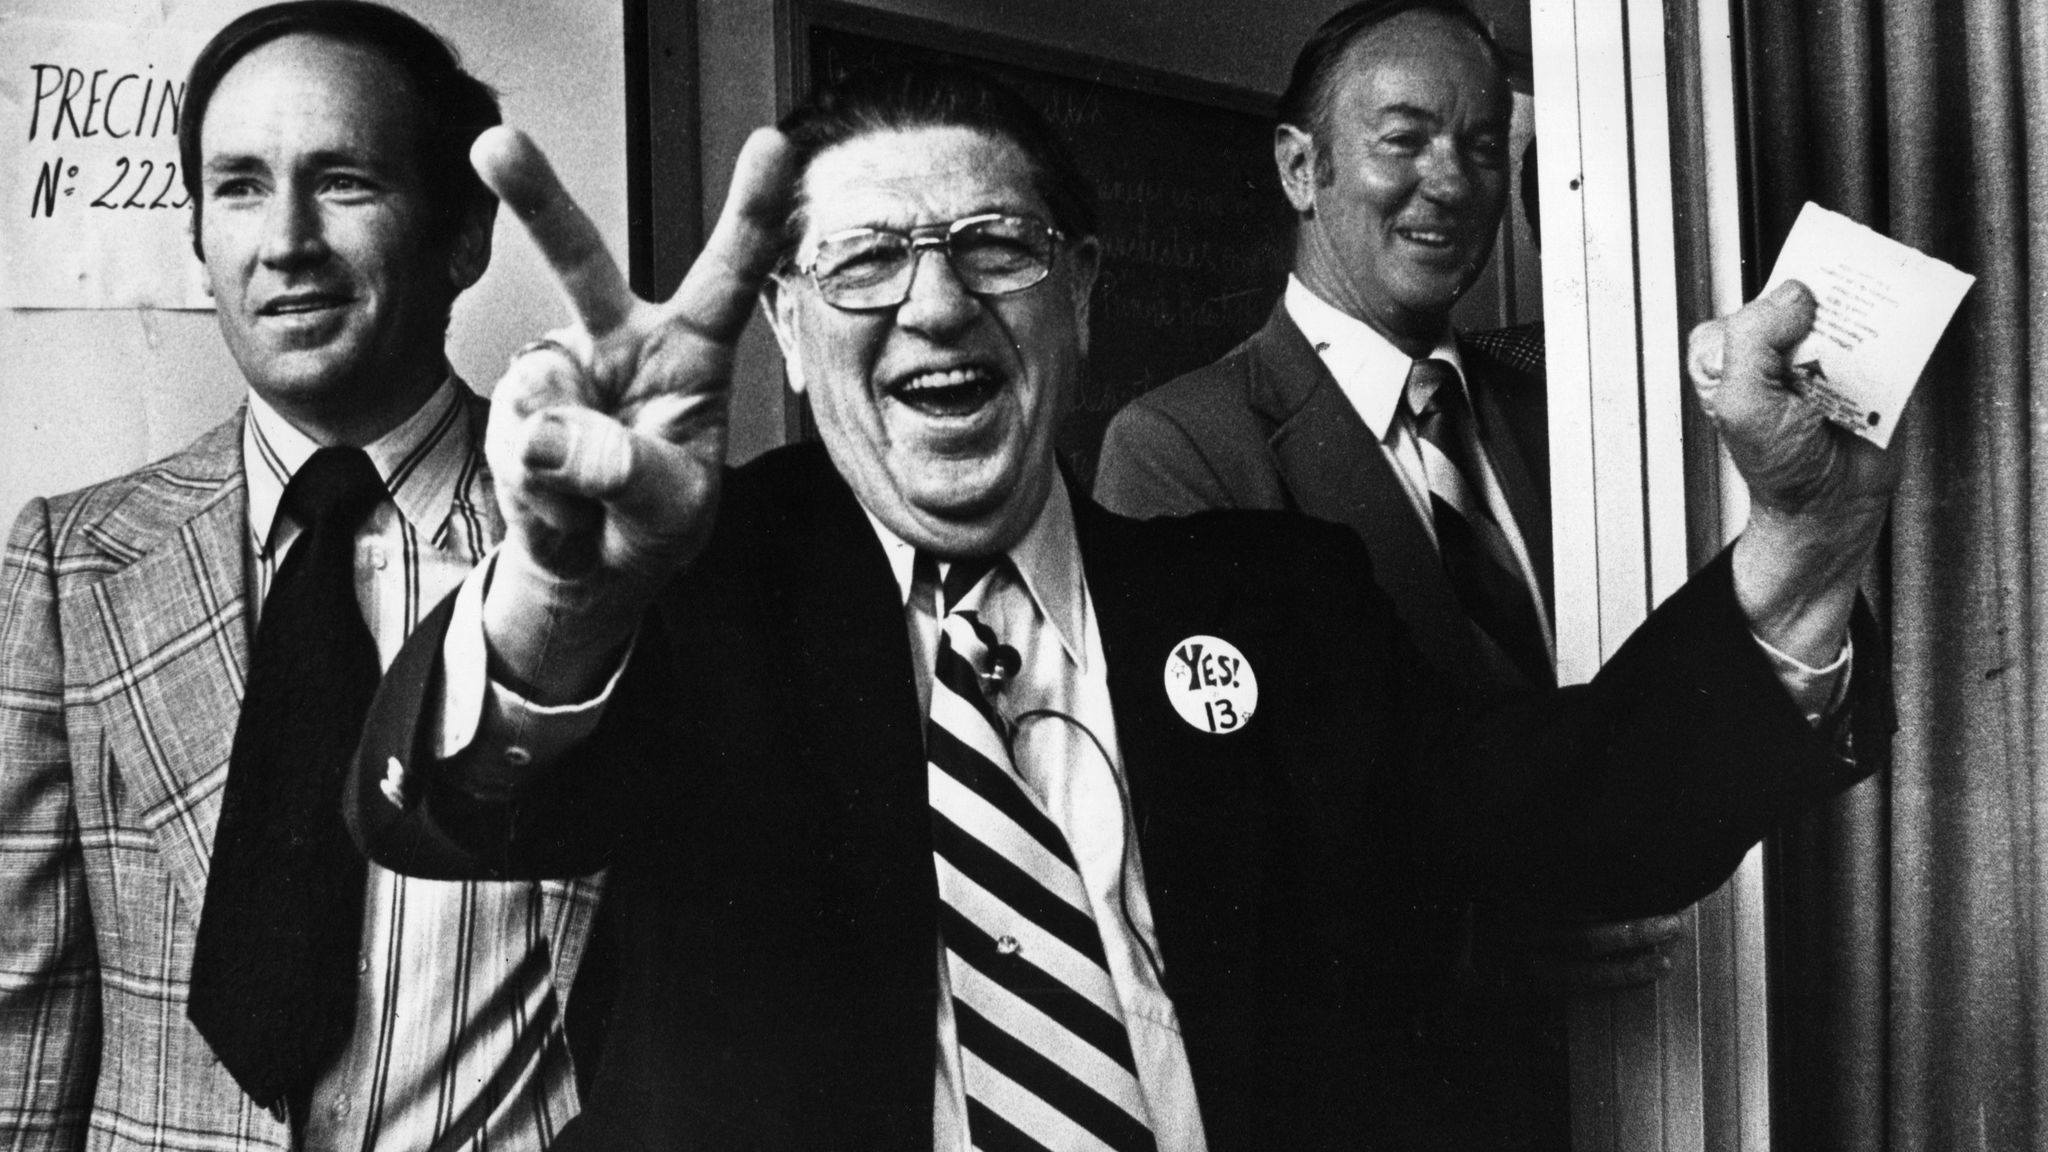 Howard Jarvis signals victory for Proposition 13 as he casts his ballot in Los Angeles on June 6, 1978.